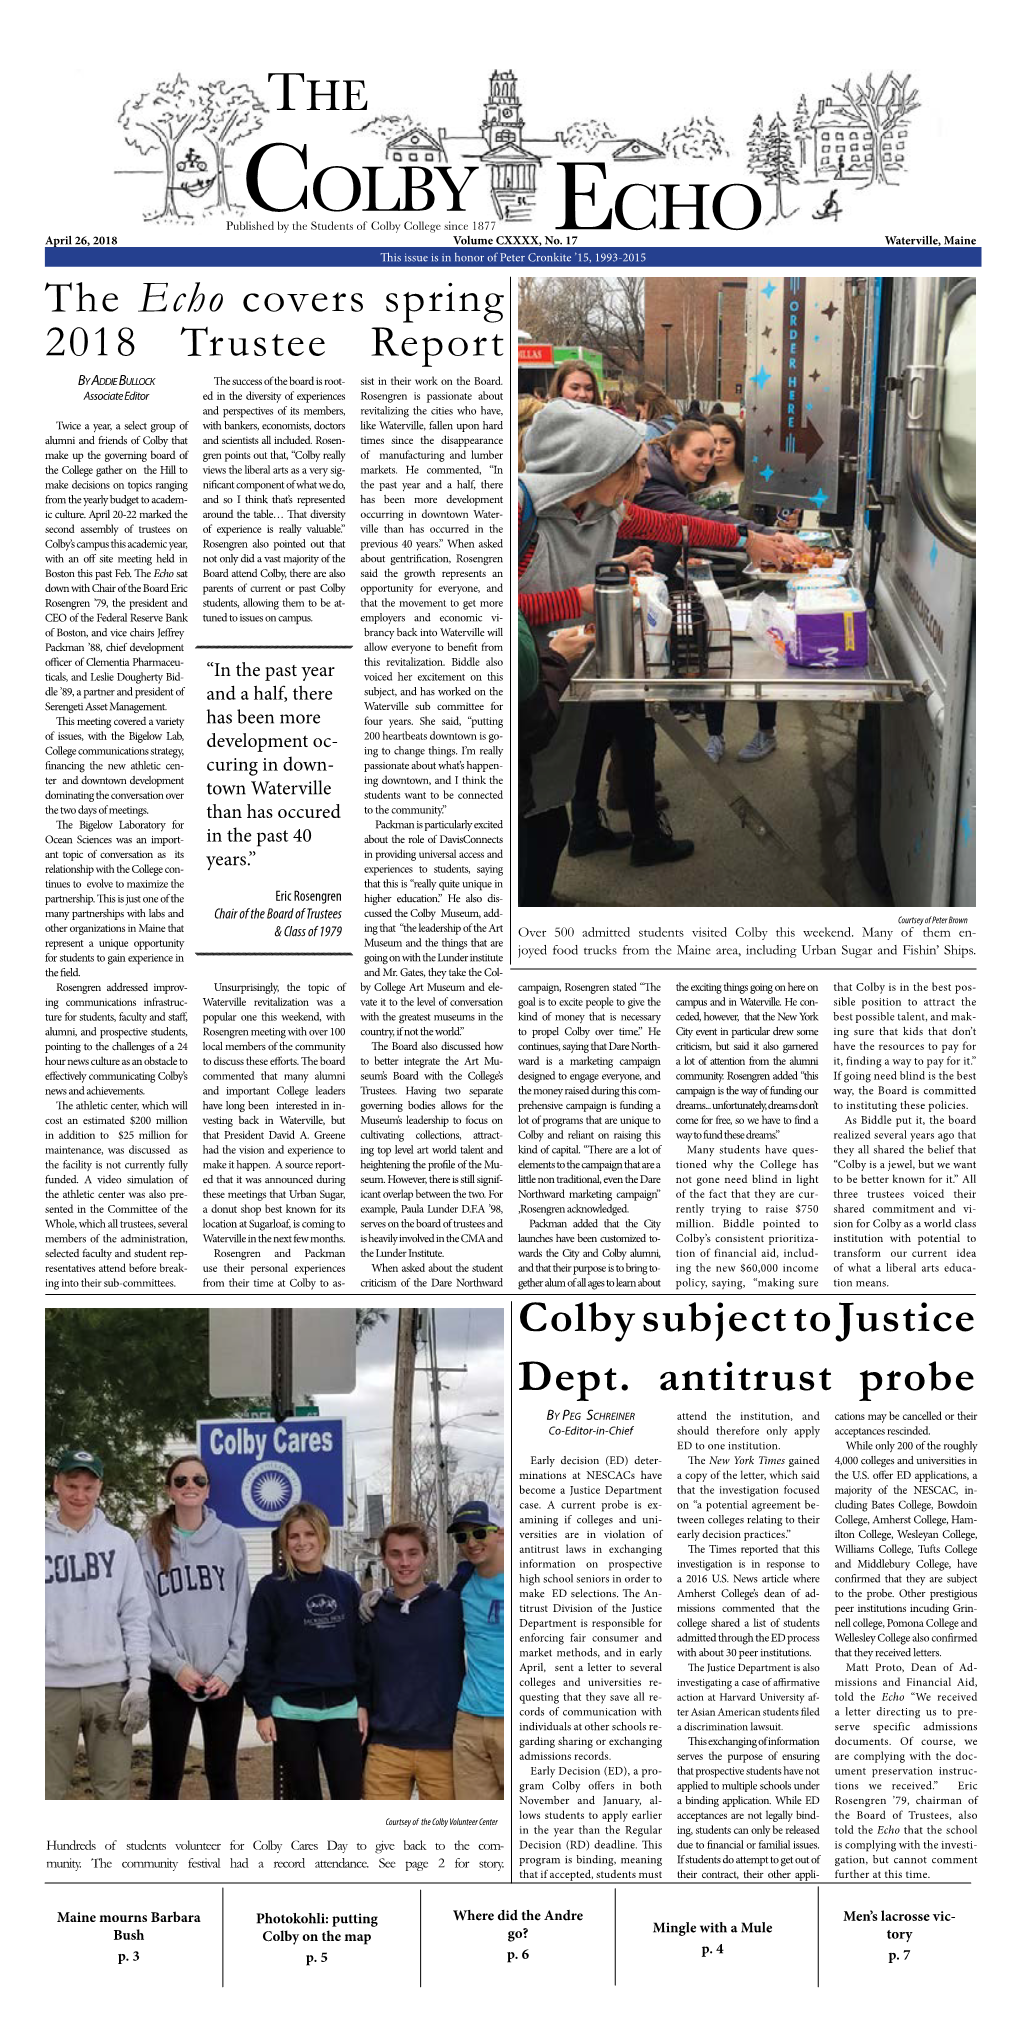 THE the Echo Covers Spring 2018 Trustee Report Colby Subject To